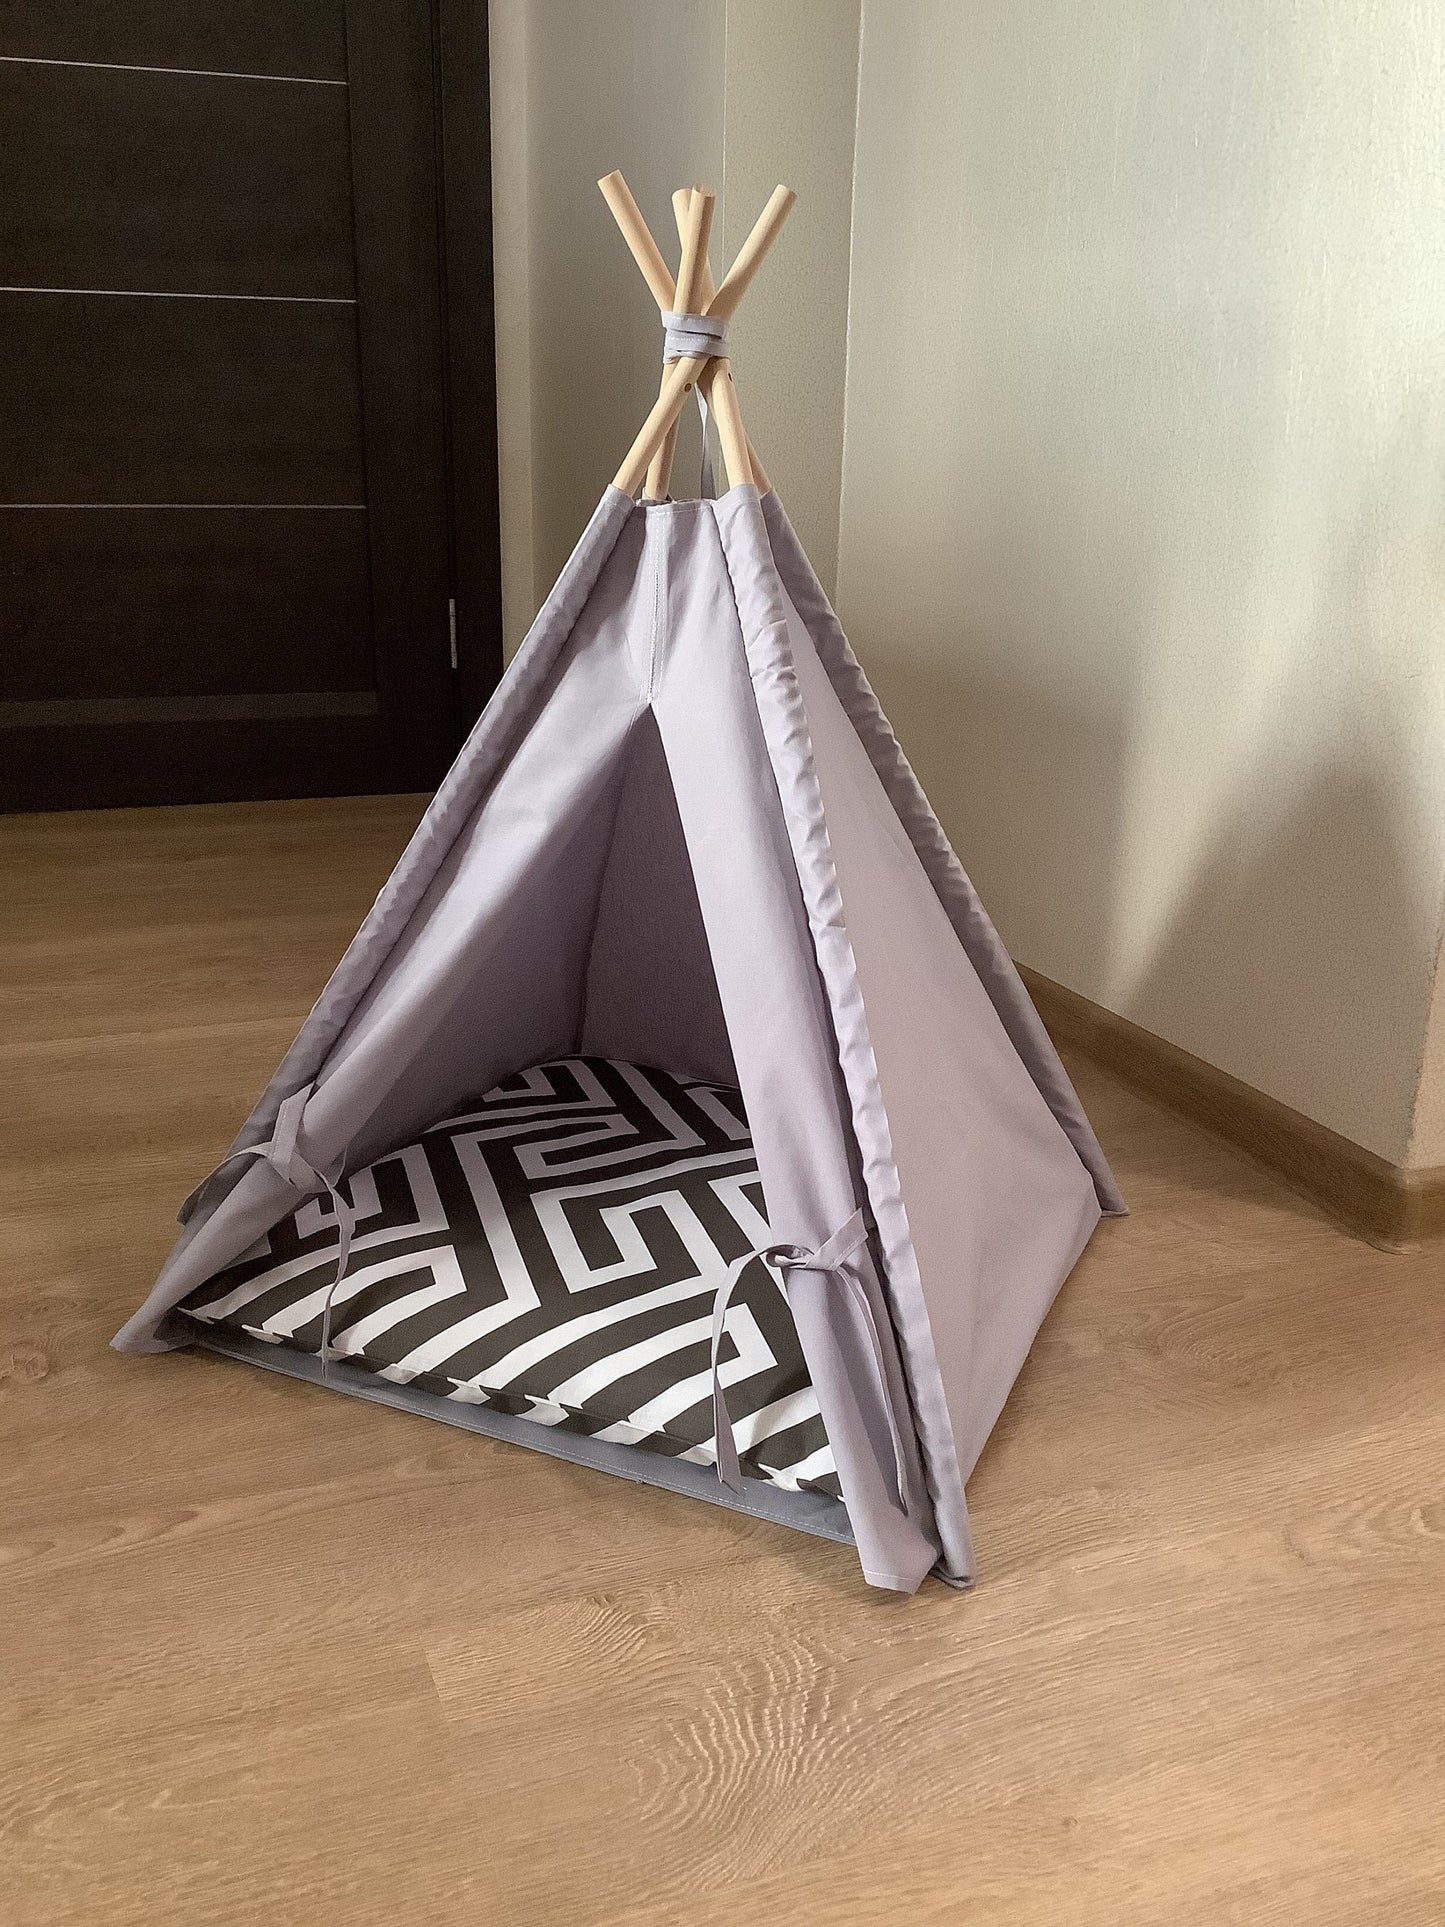 Pet bed, cat Teepee House cave, Gray, Ivory, Pinc, White tipi bed for dog, cat bunny, Boho bunny Tent Cat rabbit, Little dog, Tipi cat